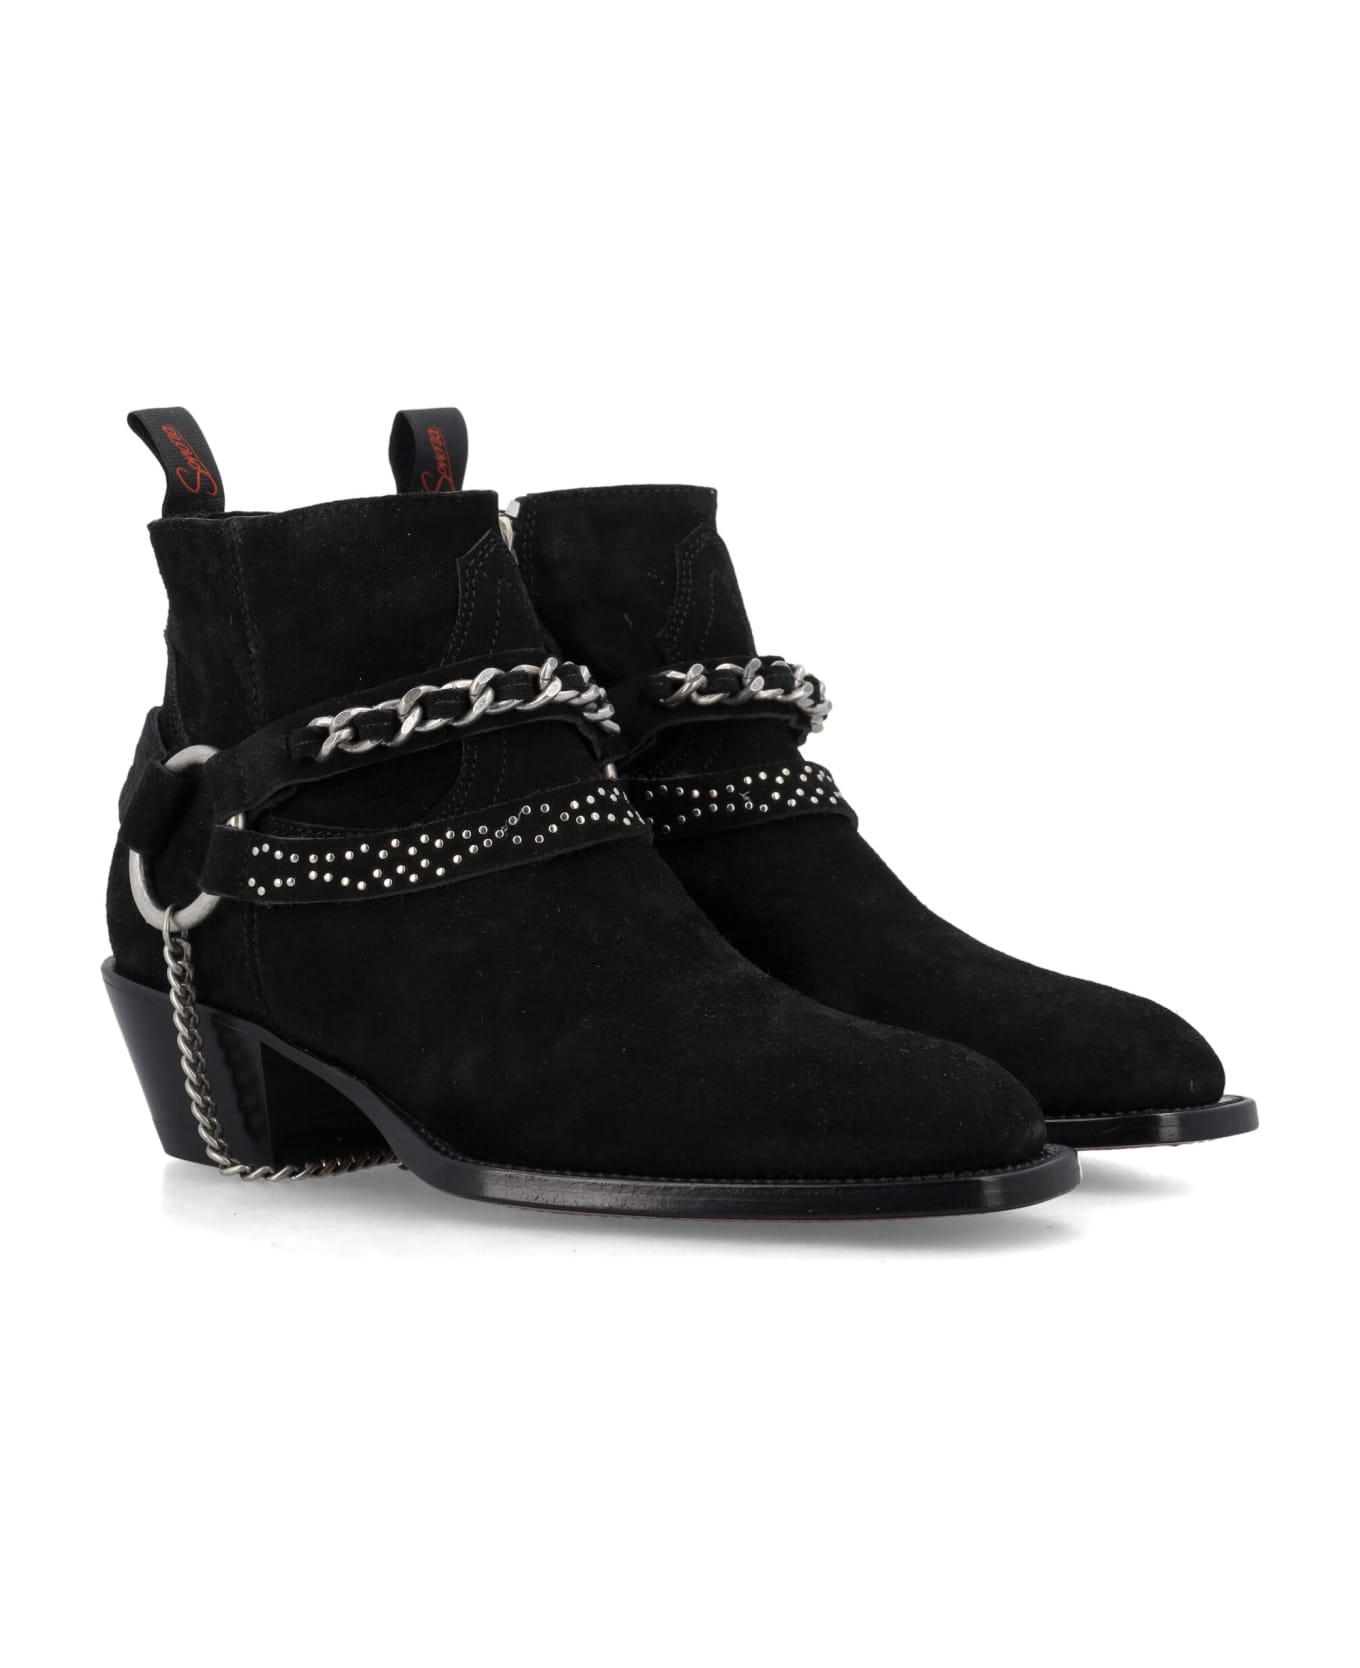 Sonora Dulce Belt Ankle Boots - BLACK